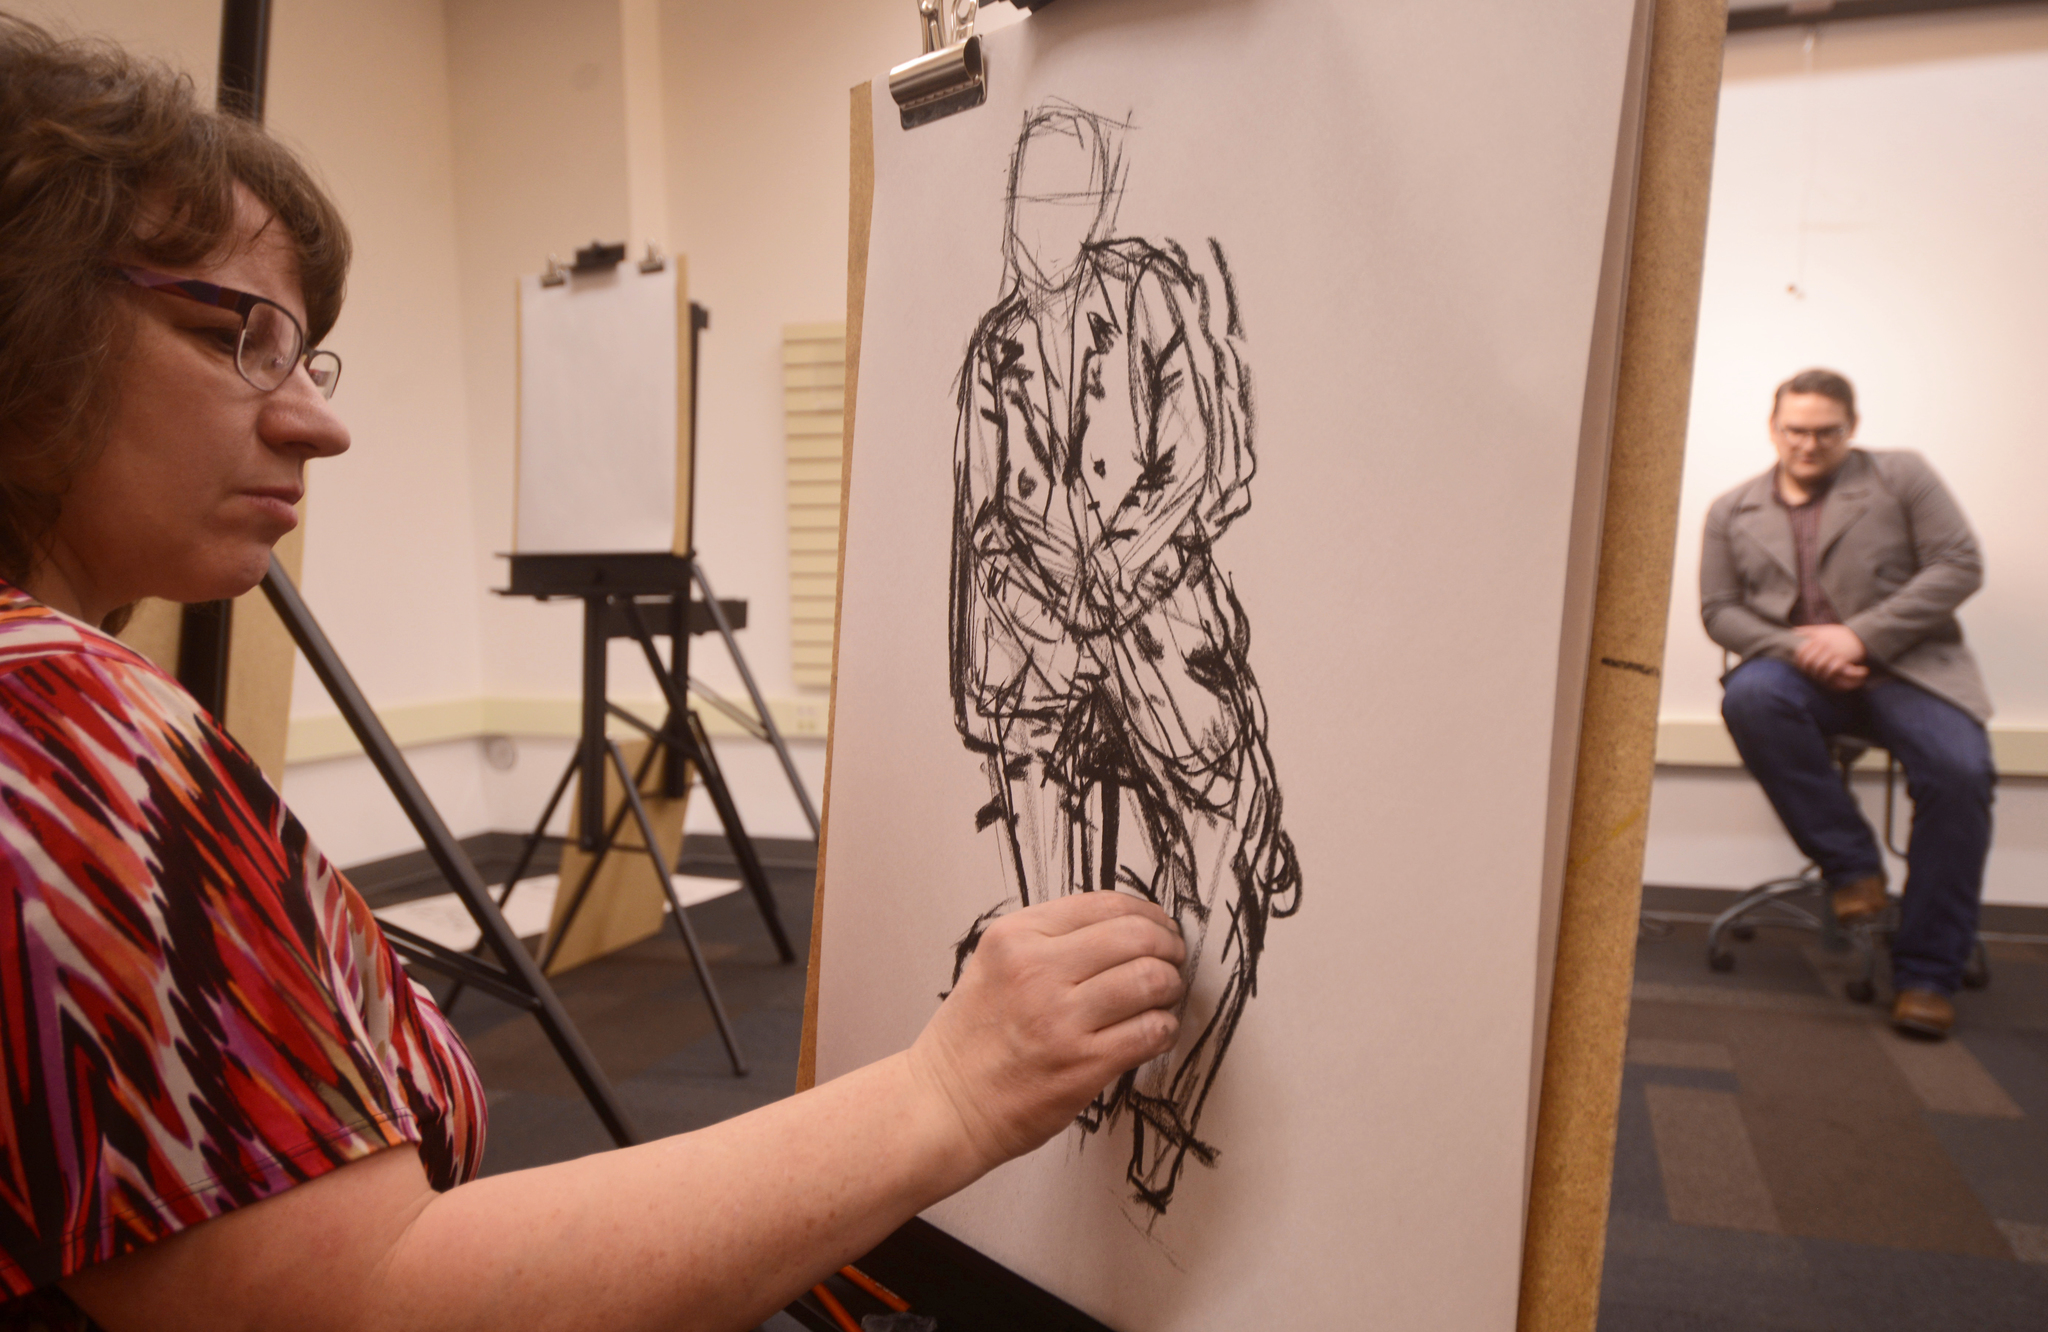 Marlene Lewis (left) sketches model Robert Dederick during a charcoal figuring-drawing class on Thursday, Feb. 23, 2017 at the Kenai Community Library in Kenai, Alaska. The class is the latest in a series of community art classes lead by artist and Kenai librarian James Adcox.